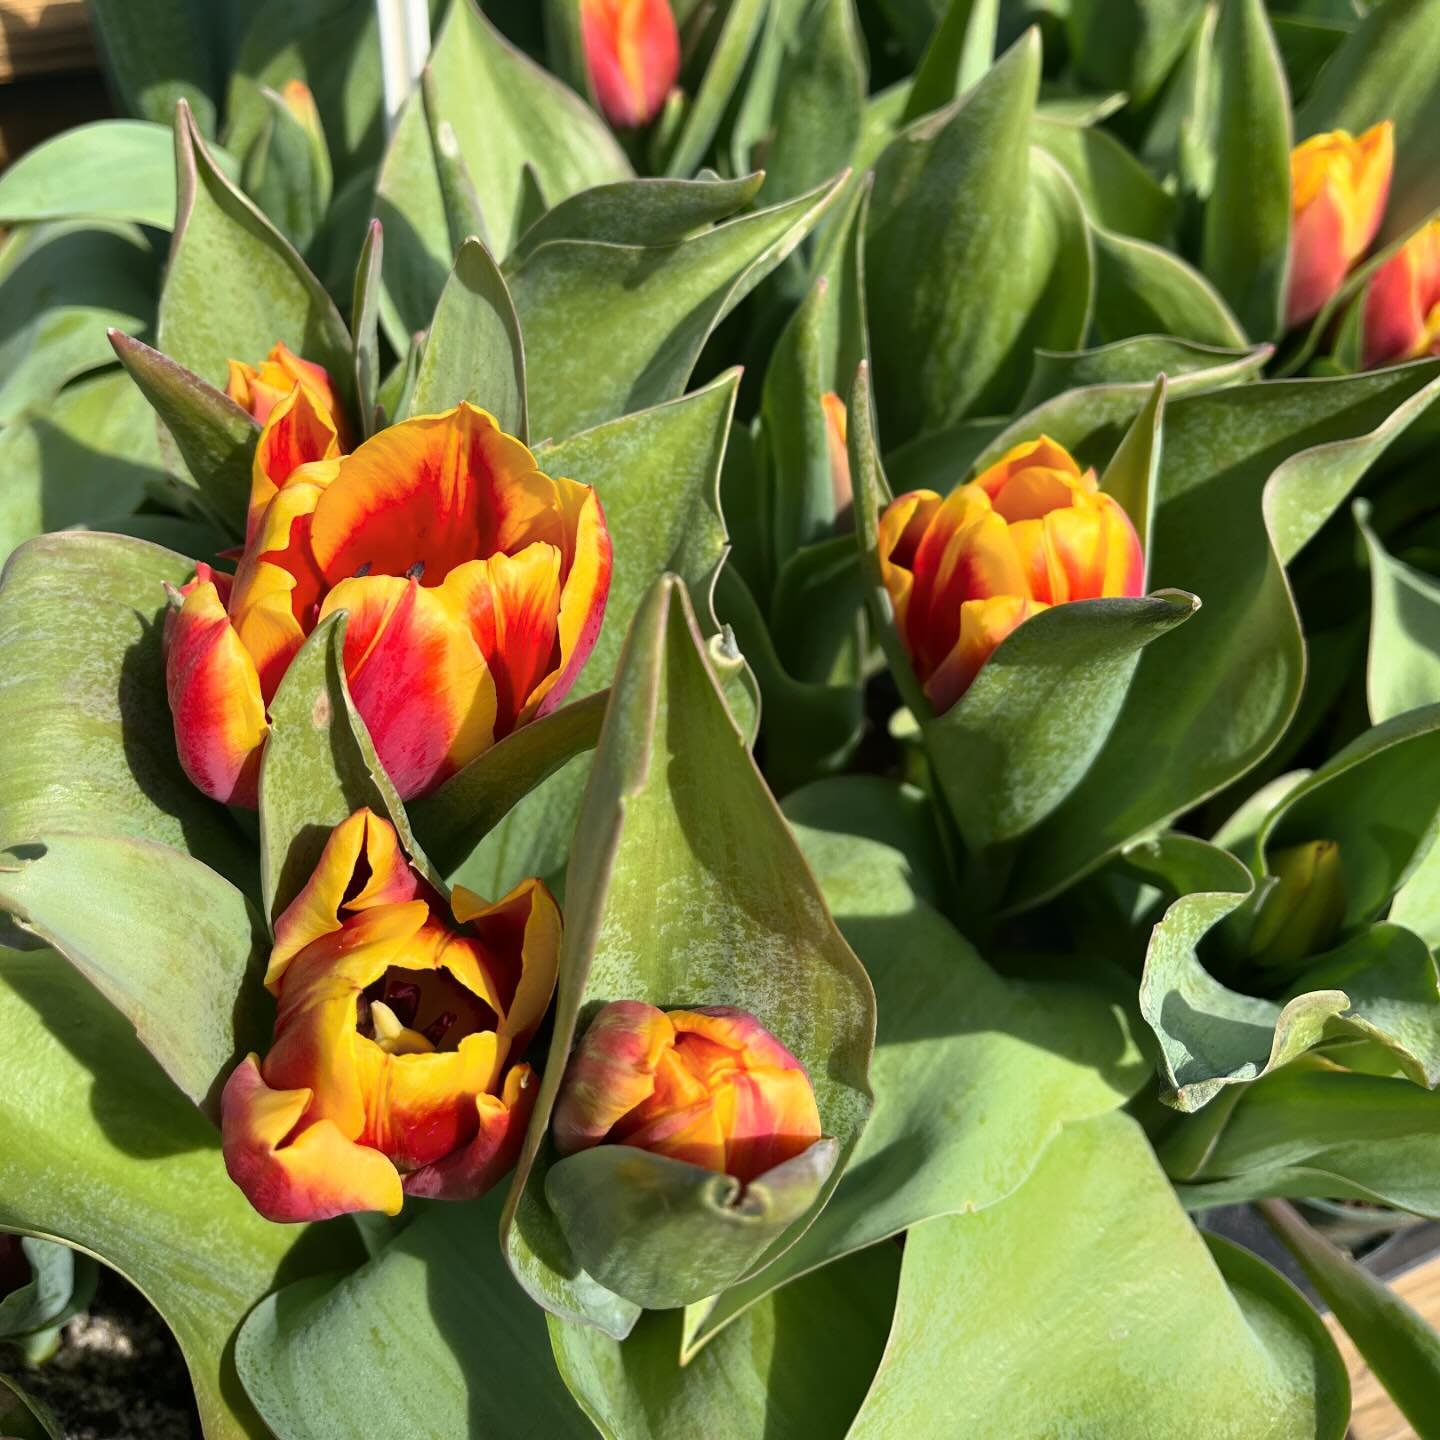 Celebrating spring time with our beautiful collection of tulips, lilies, and daffodils